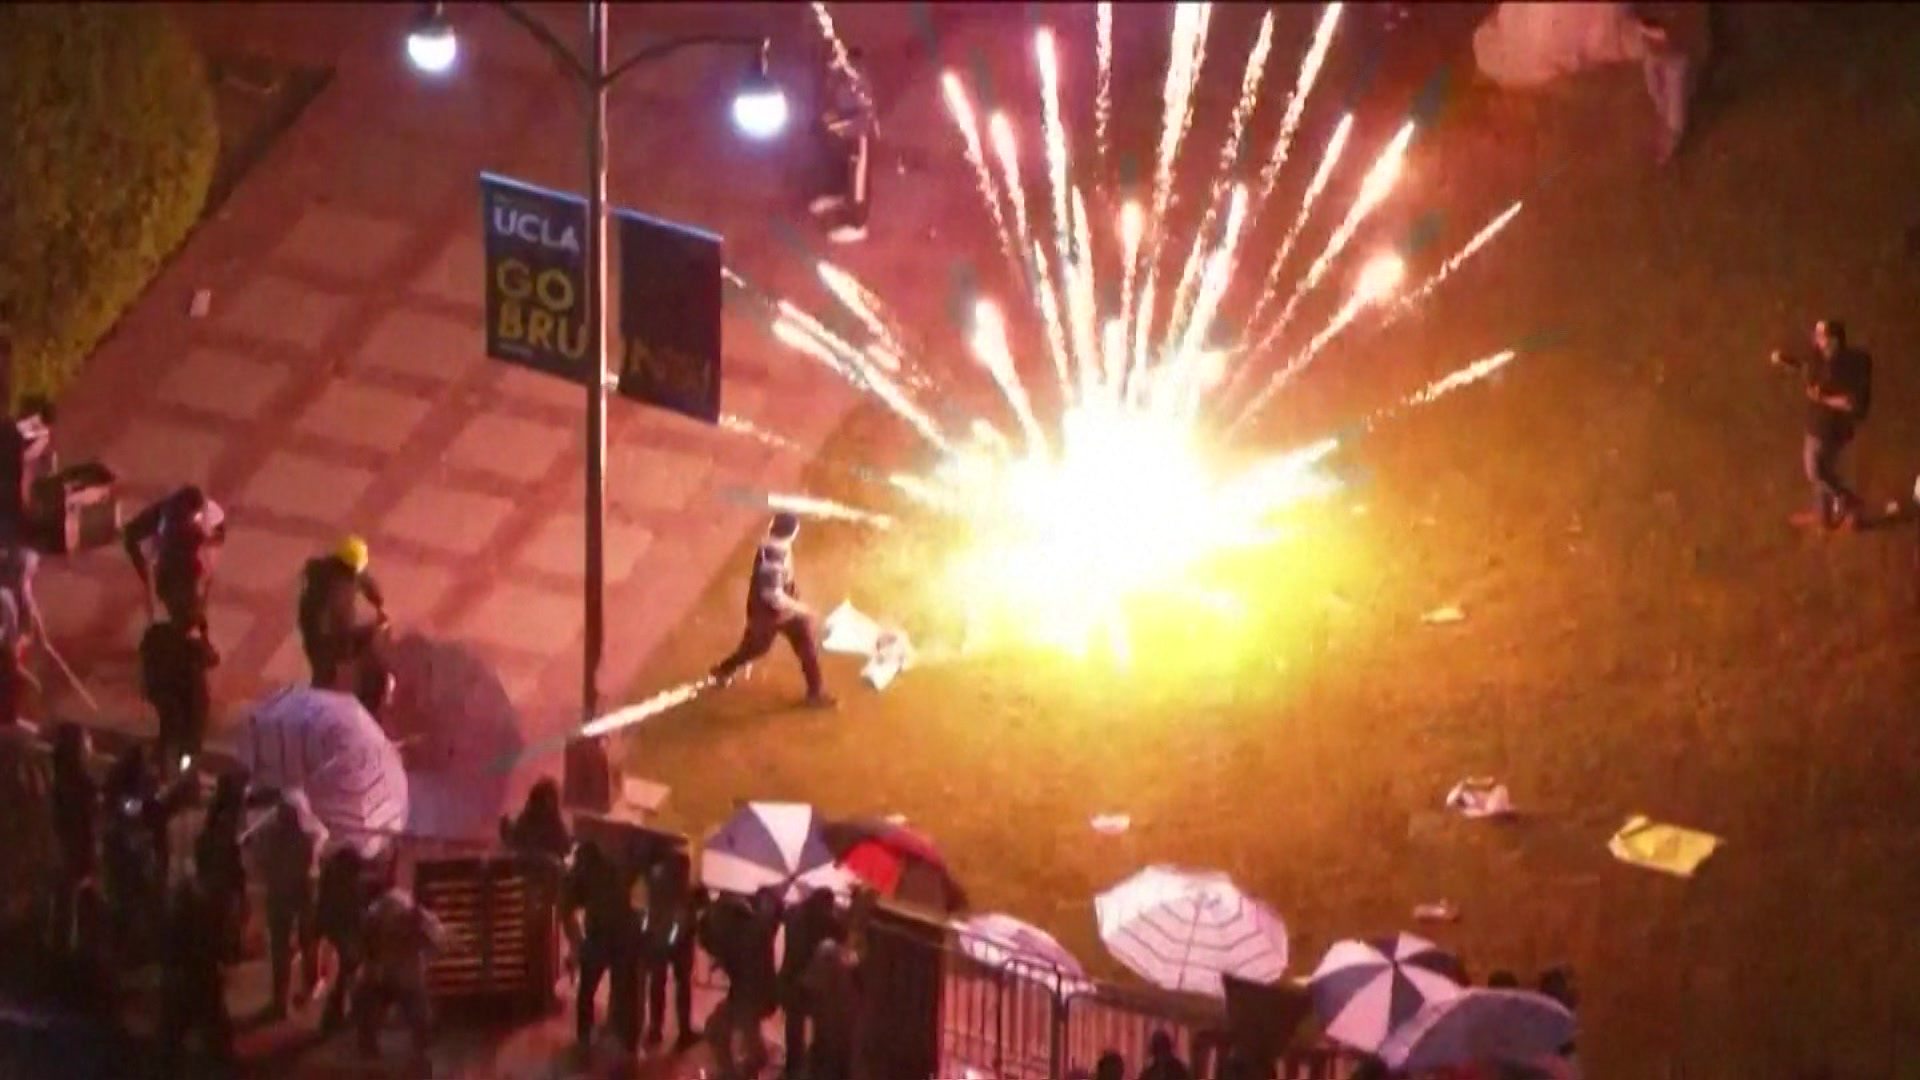 Pro-Israeli thugs attack UCLA protesters camp with clubs, fireworks and pepper spray.